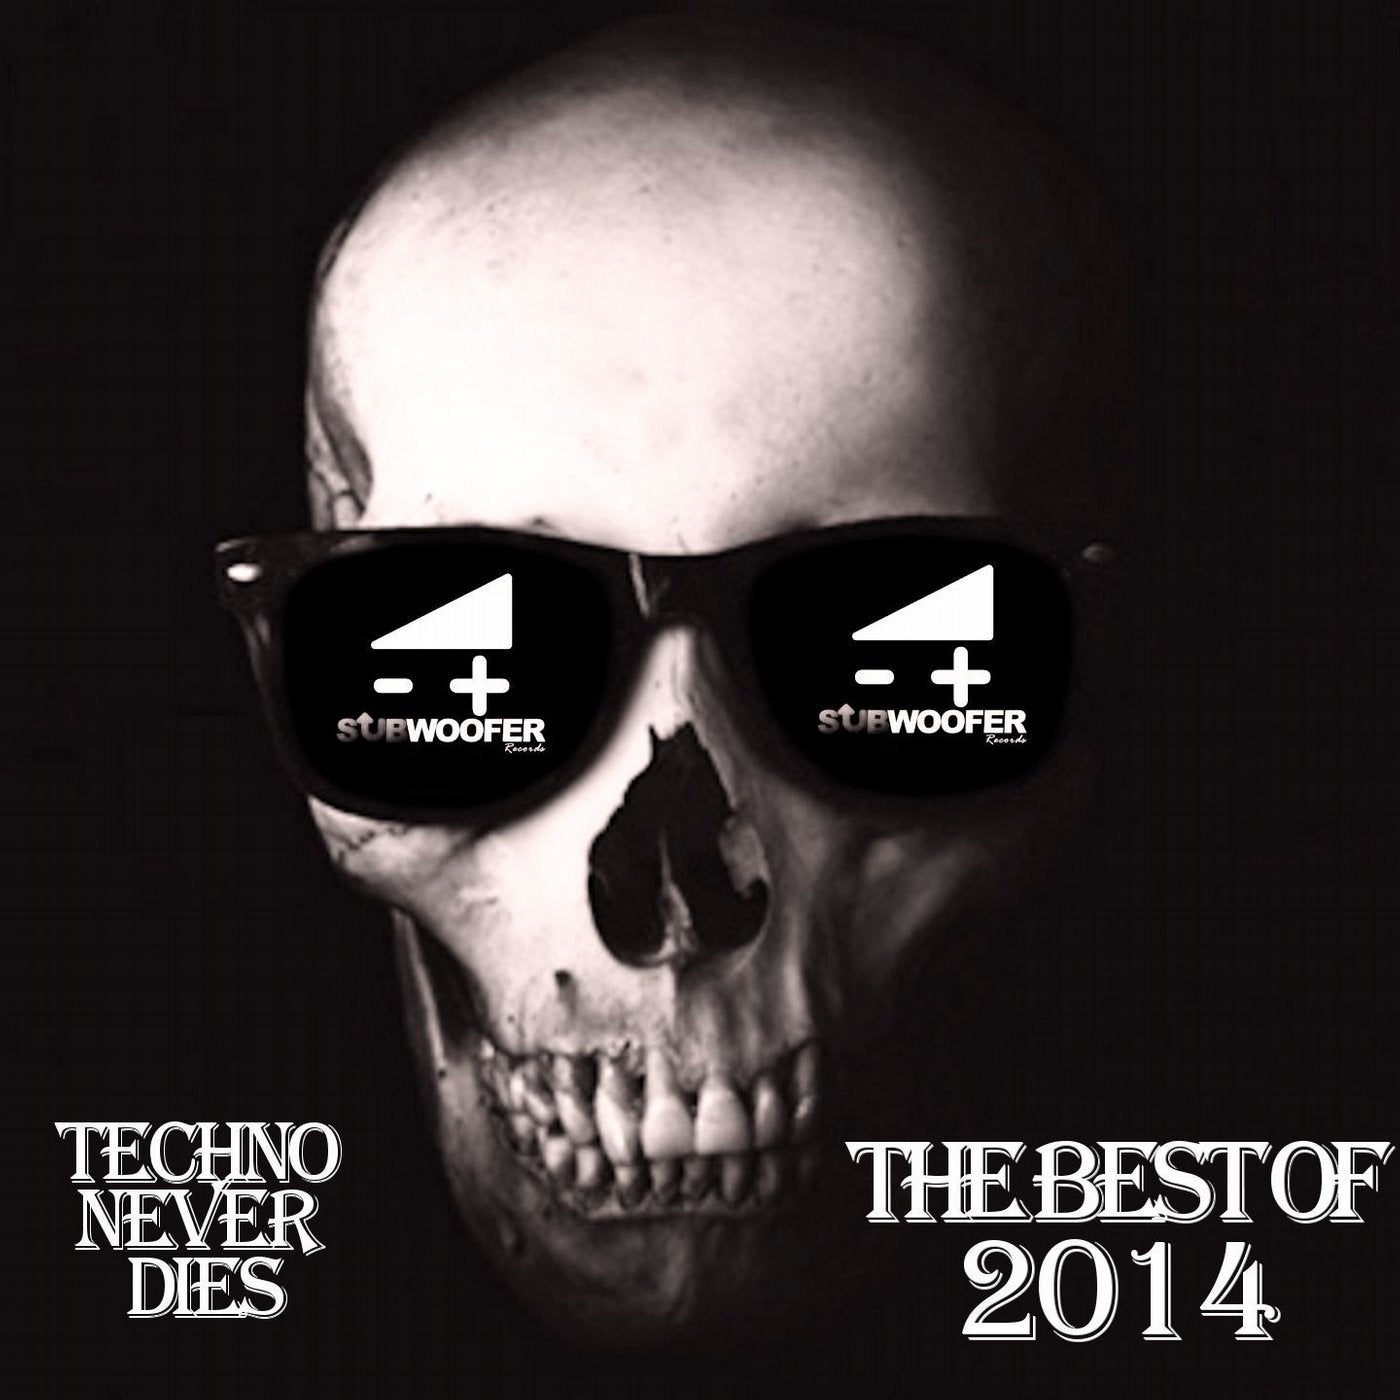 Subwoofer Records: The Best of 2014 (Techno Never Dies)